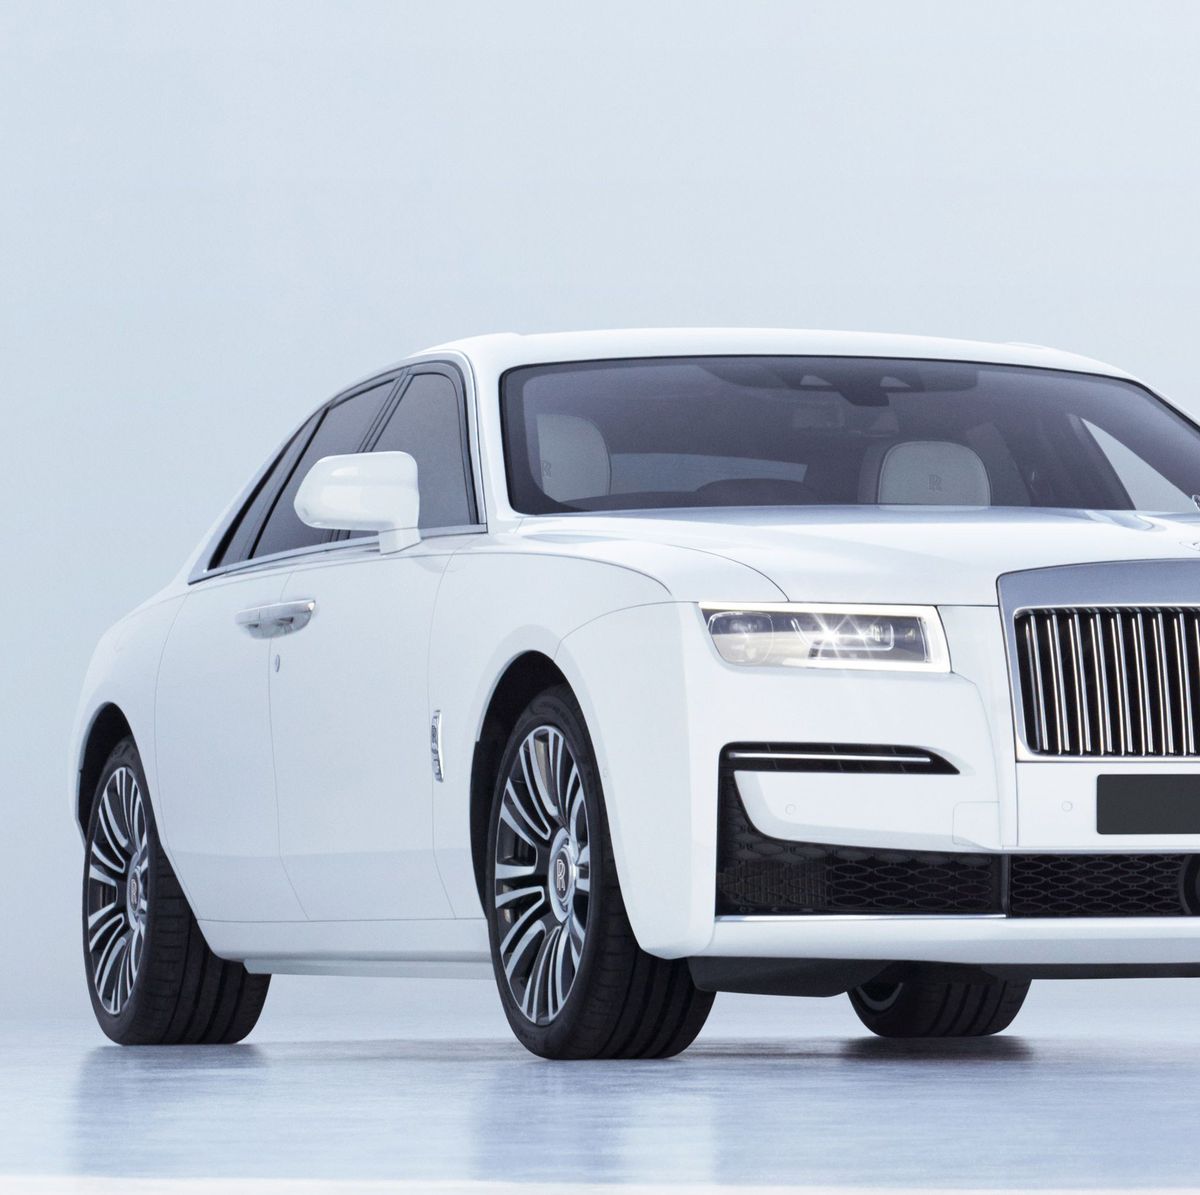 THE HISTORY OF THE ROLLS-ROYCE GHOST